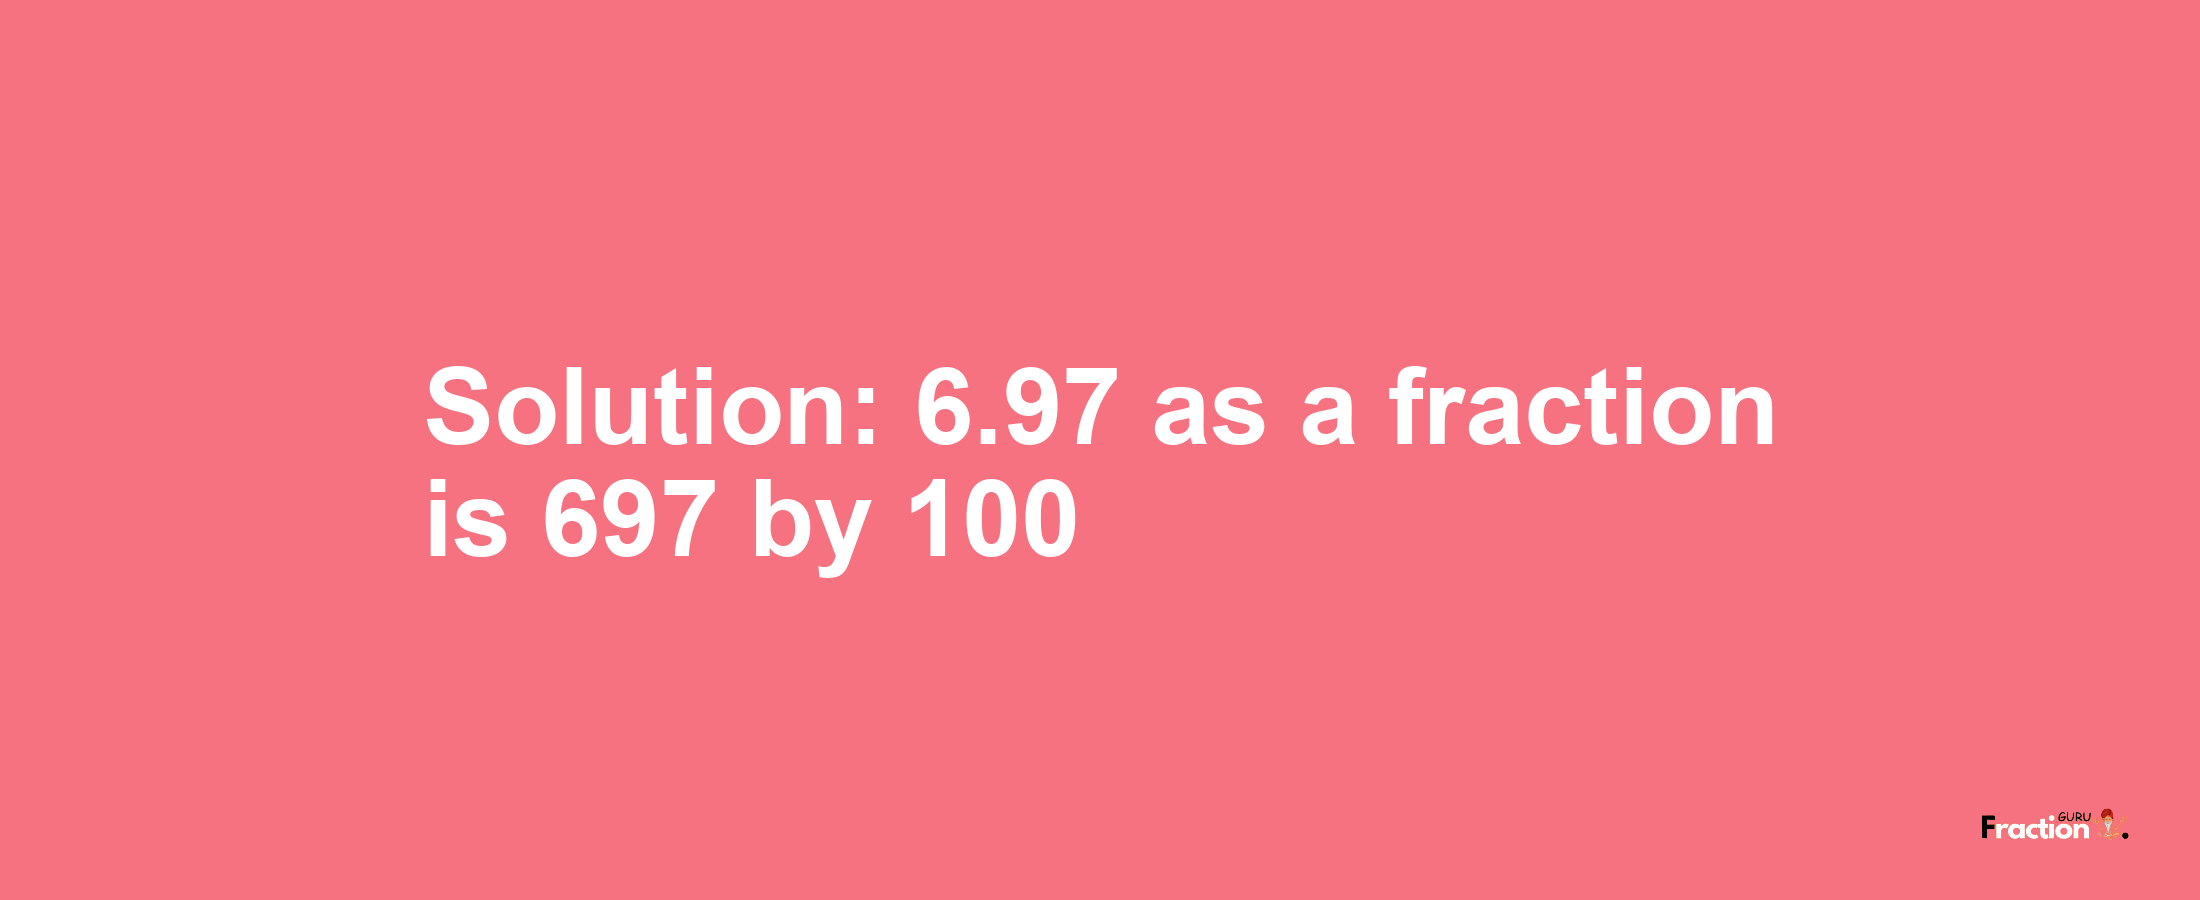 Solution:6.97 as a fraction is 697/100